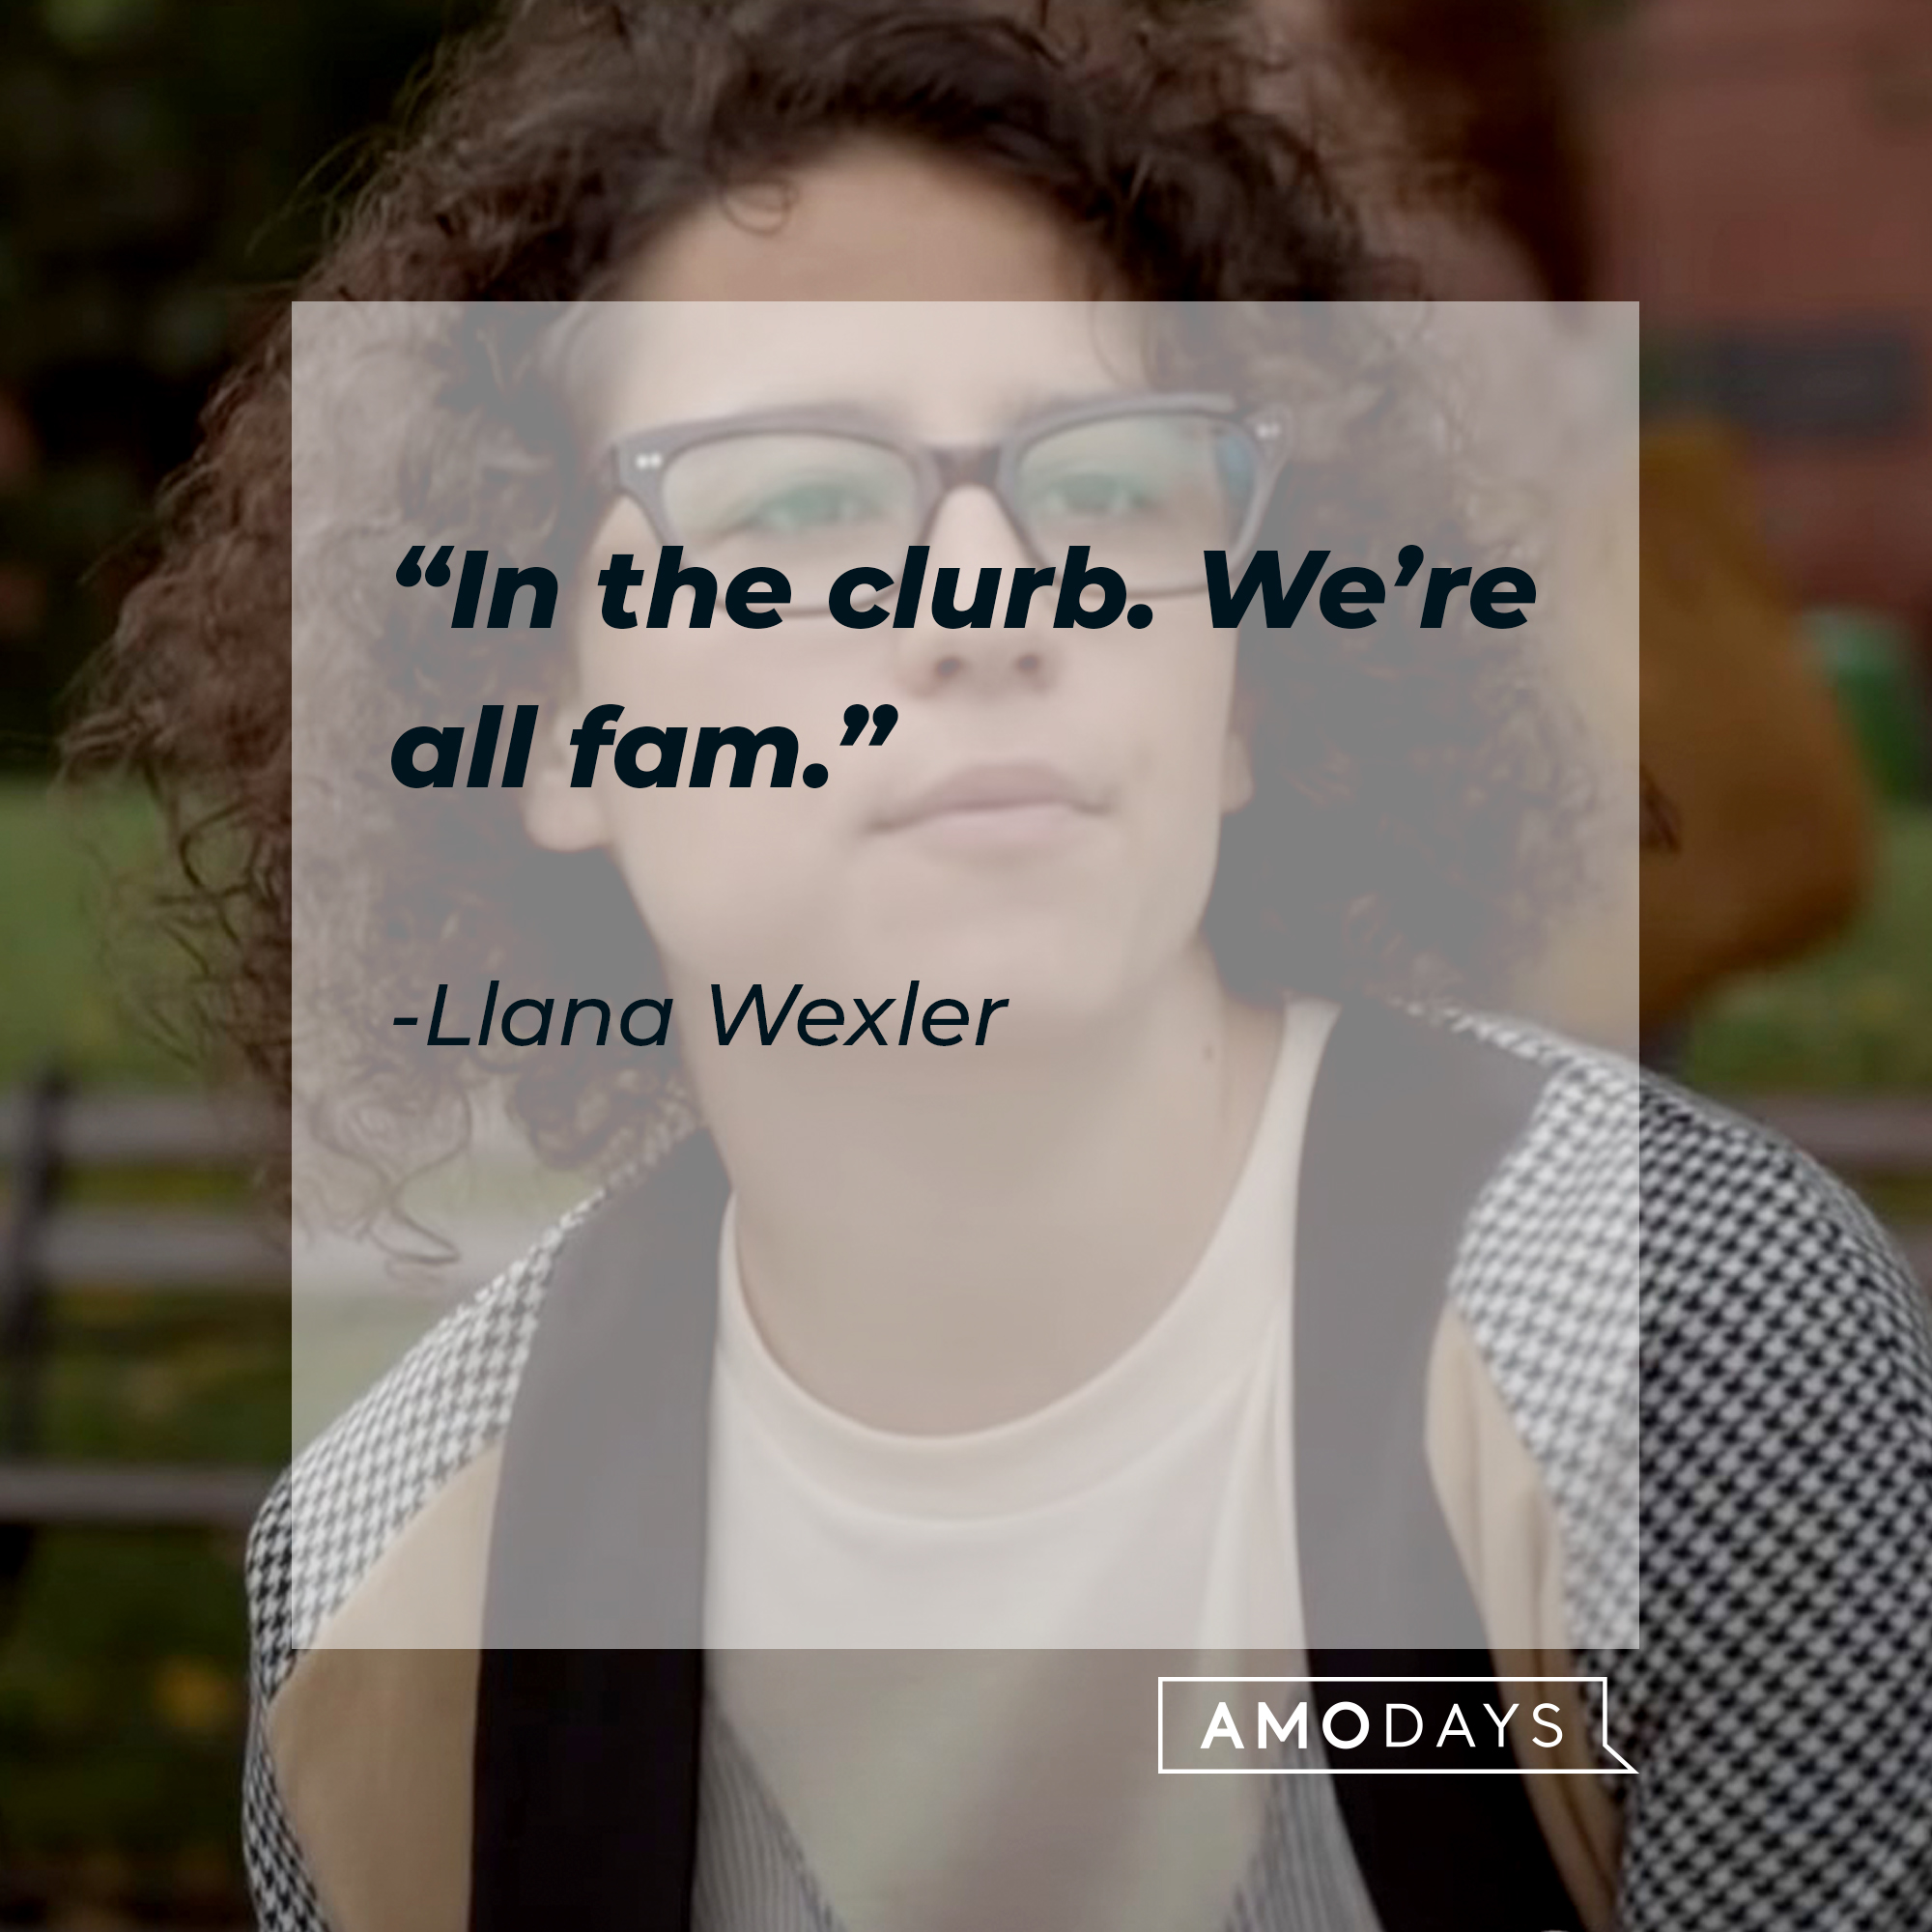 An image of Llana Wexler with her quote: “In the clurb. We’re all fam.” | Source: youtube.com/ComedyCentral